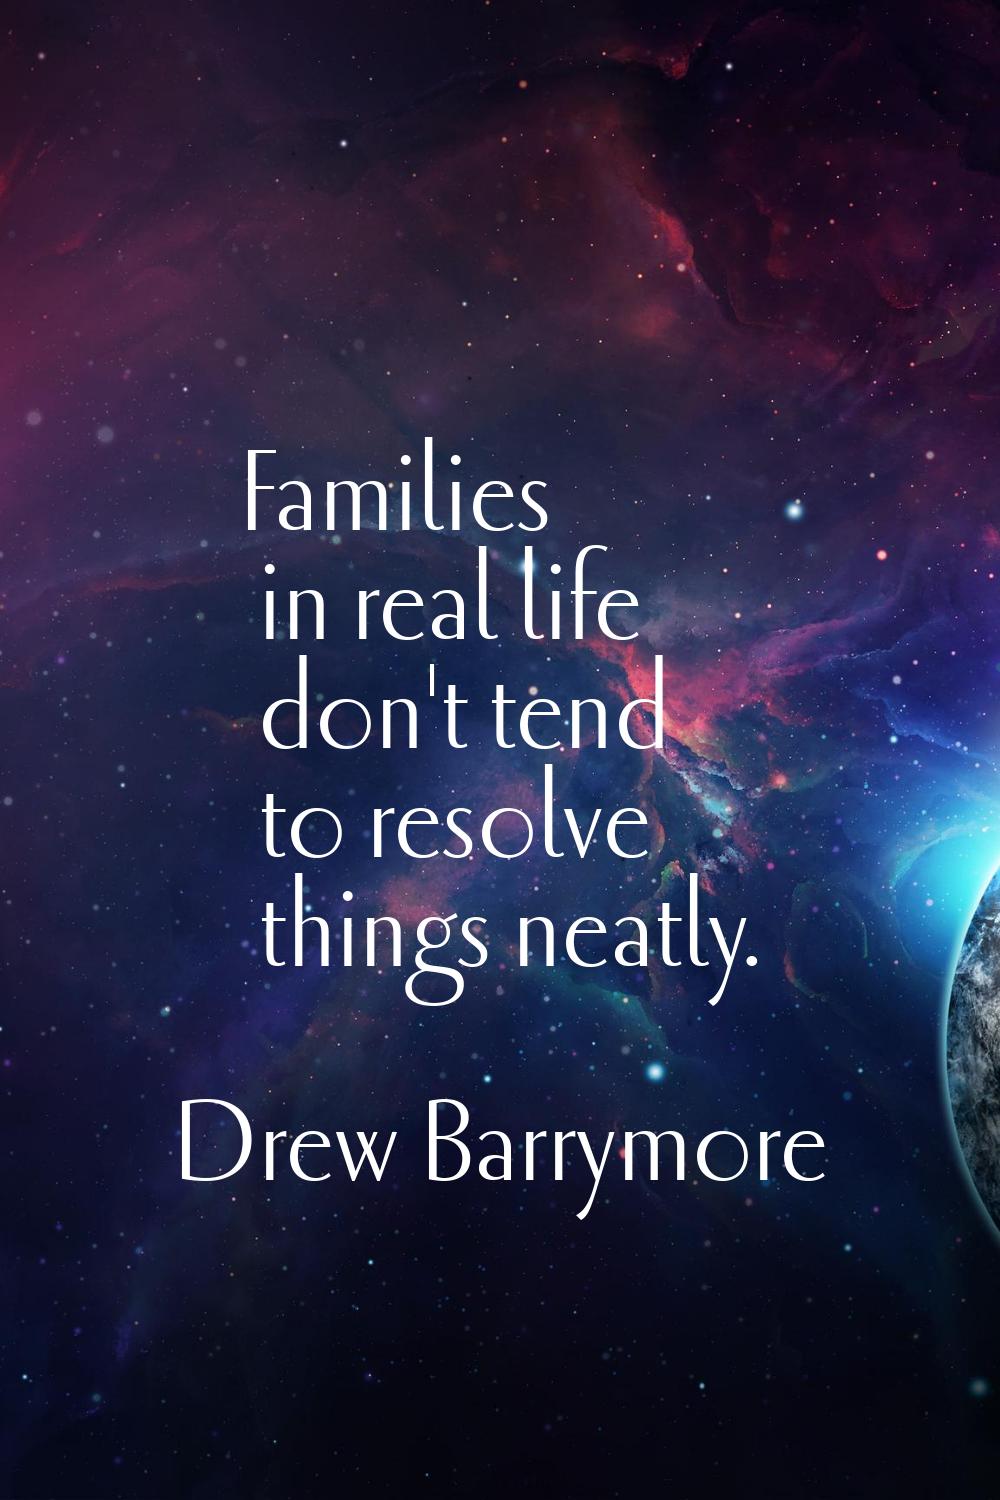 Families in real life don't tend to resolve things neatly.